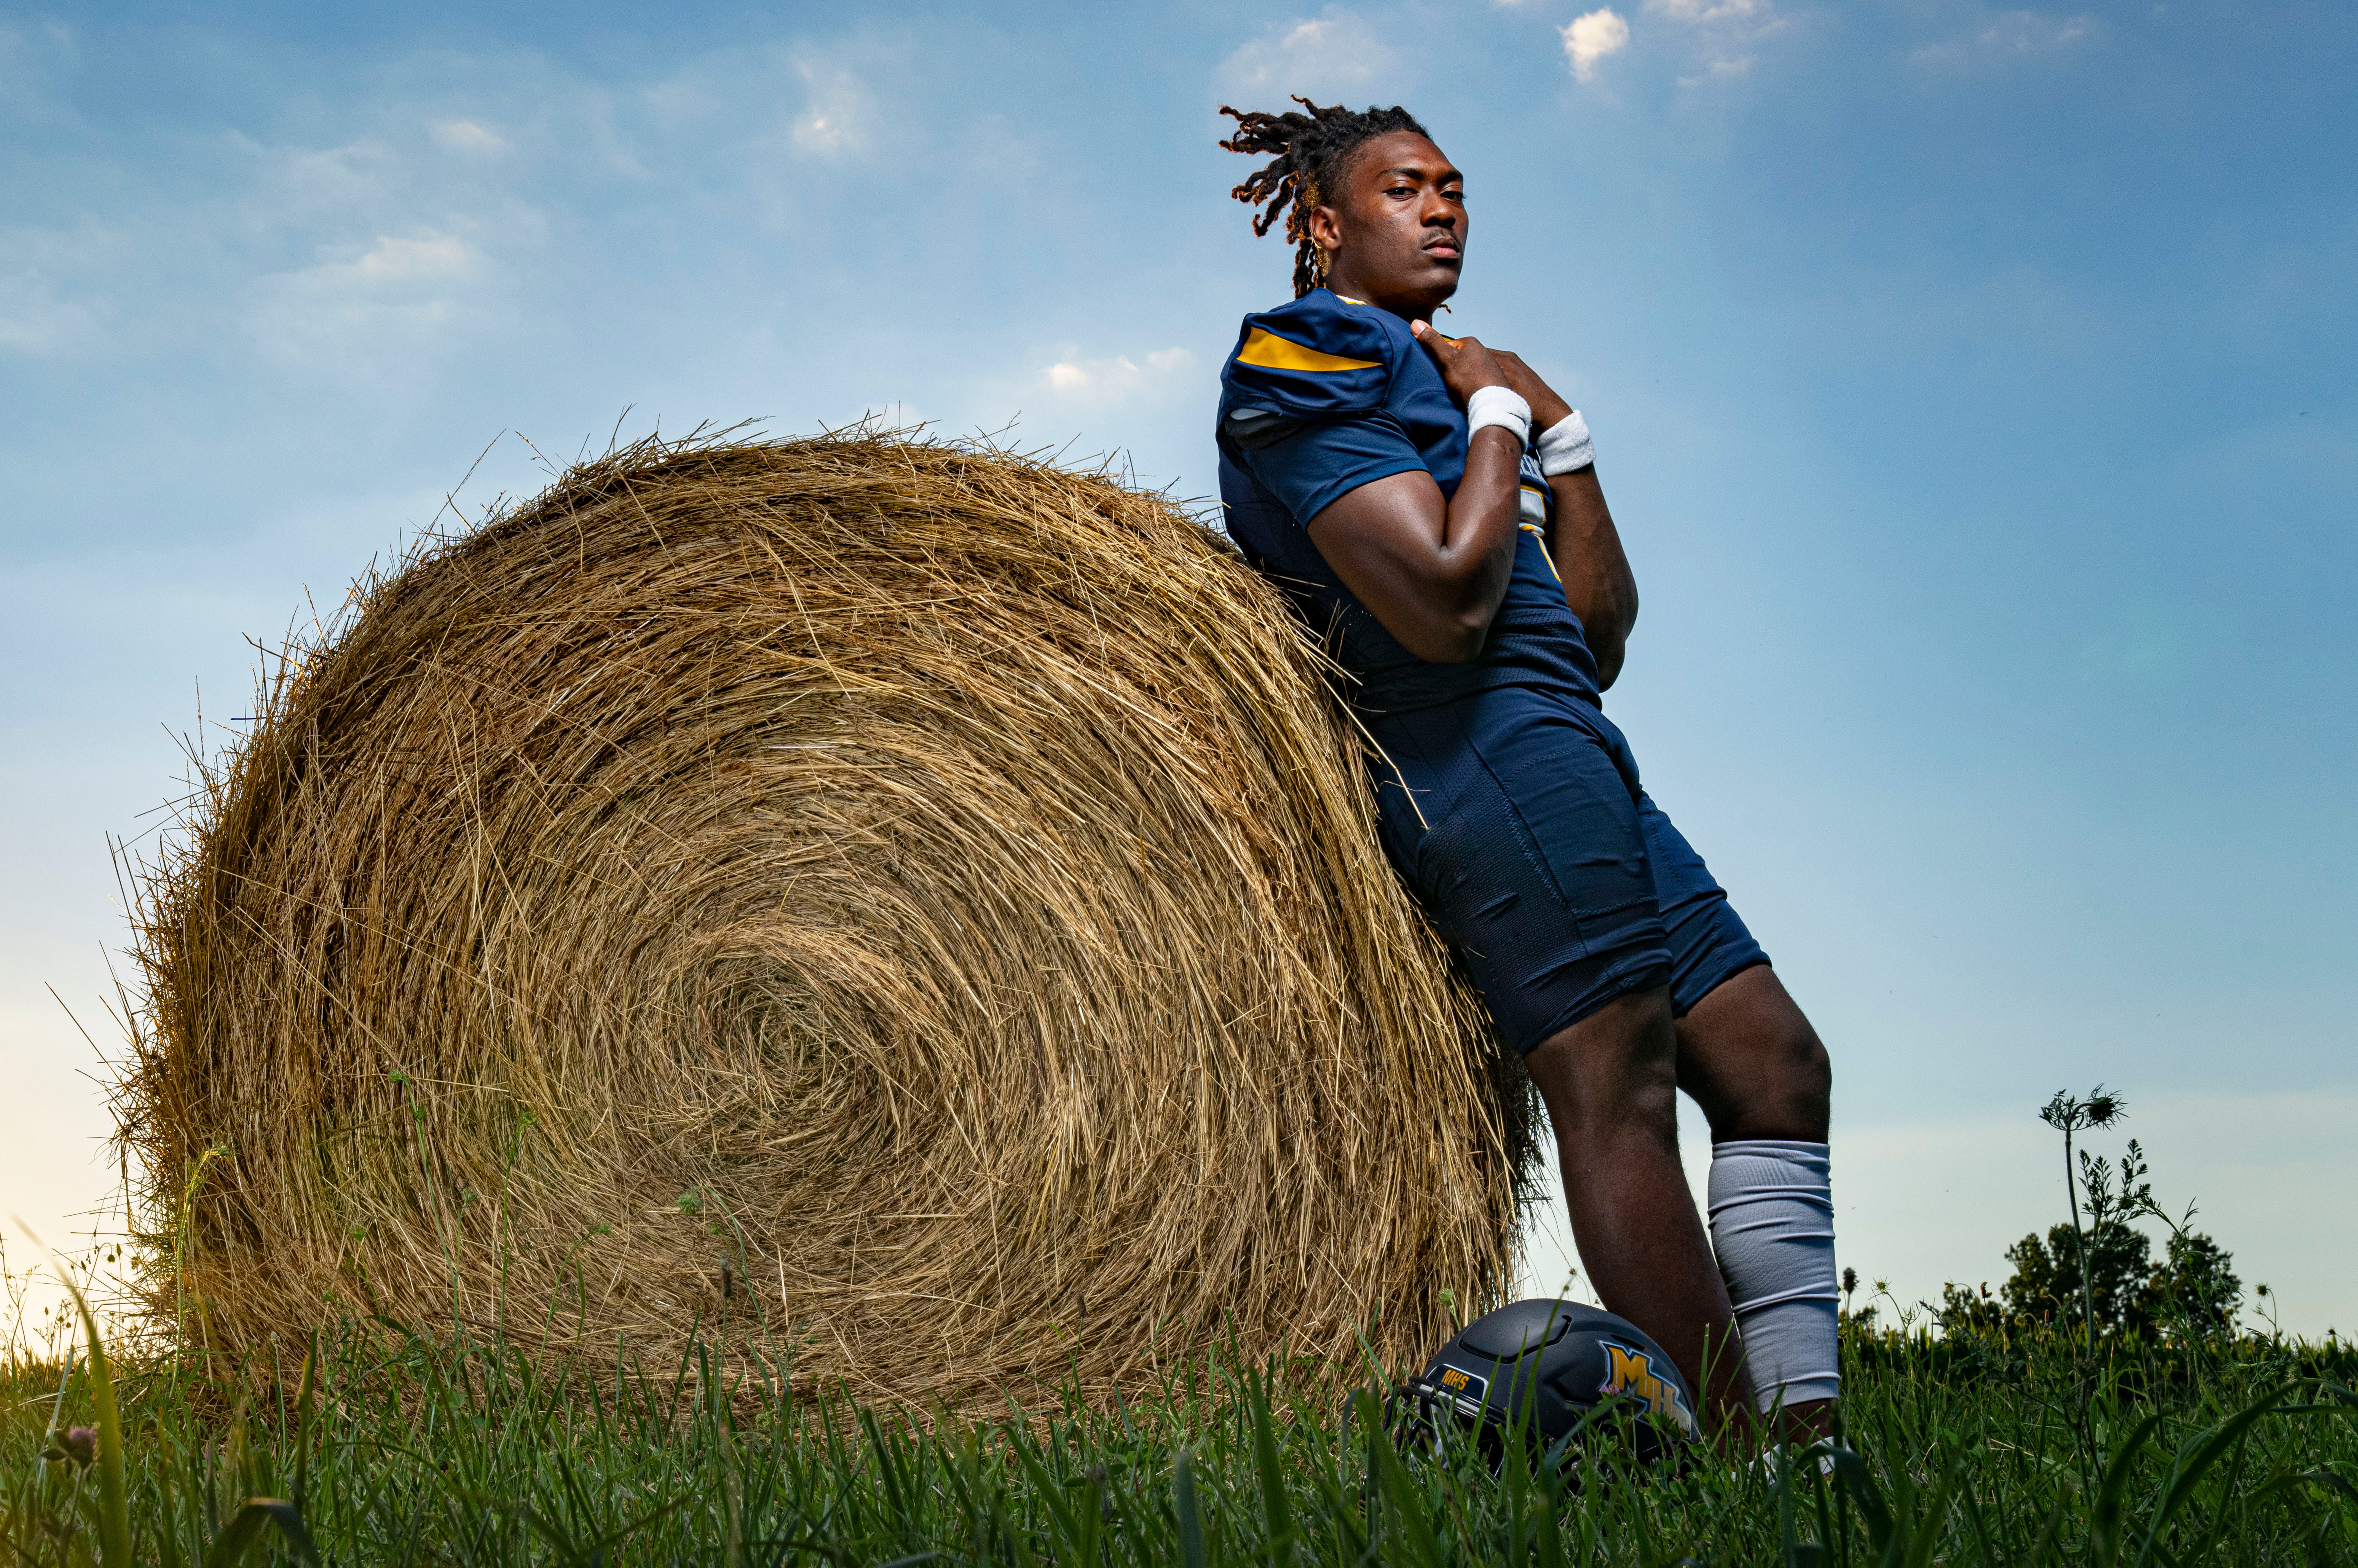 Mooresville senior quarterback Nick Patterson (9) photographed on Tuesday, July 12, 2022, in rural Mooresville.